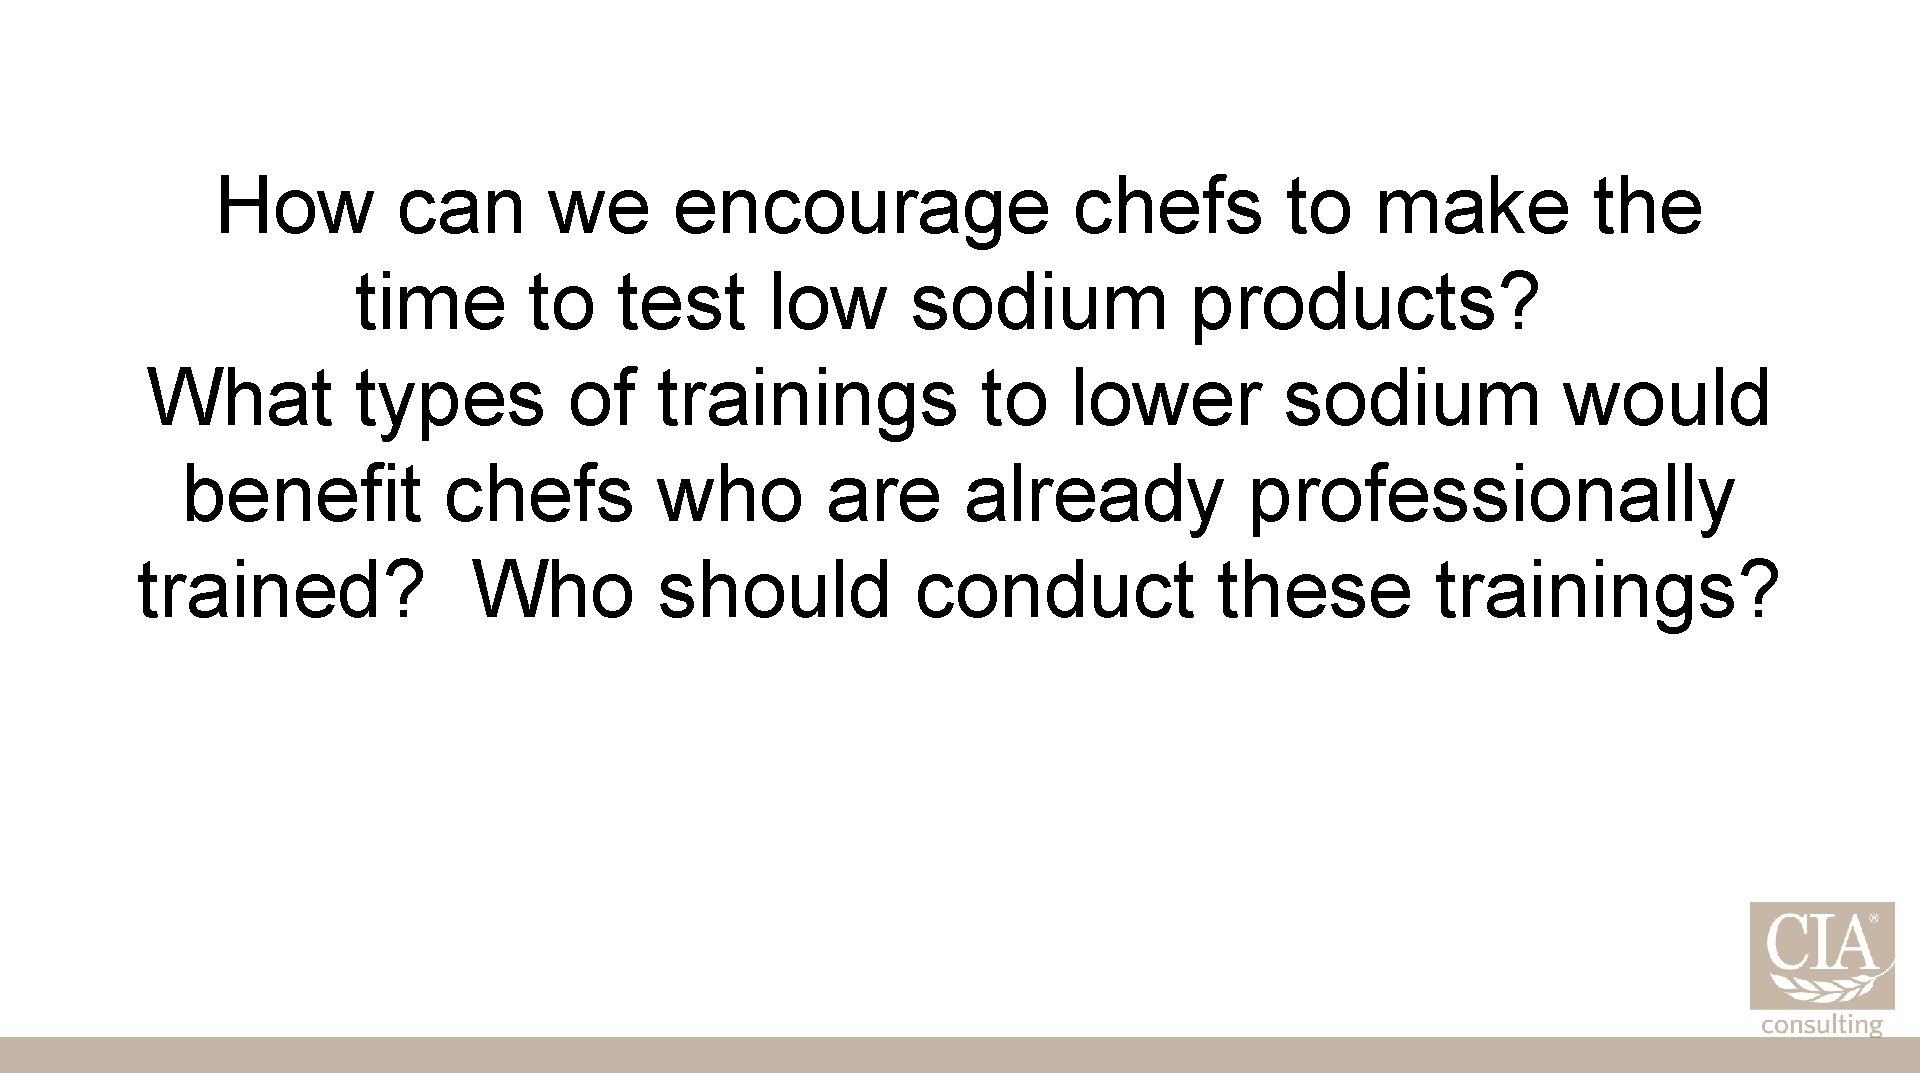 How can we encourage chefs to make the time to test low sodium products?